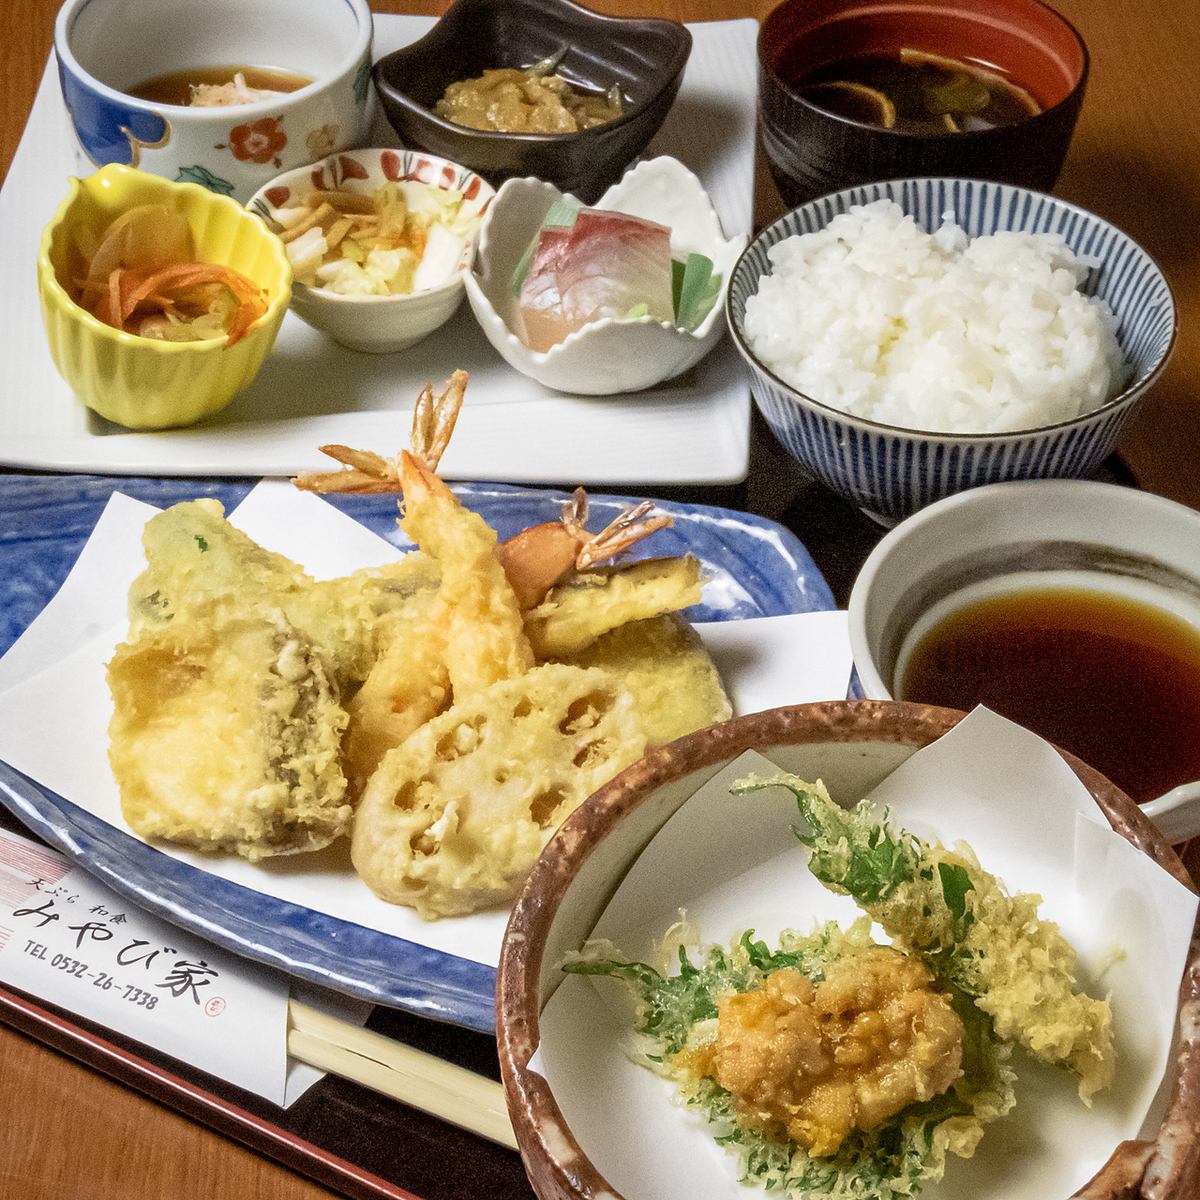 You can enjoy a wide variety of tempura, hearty set meals and lunch!